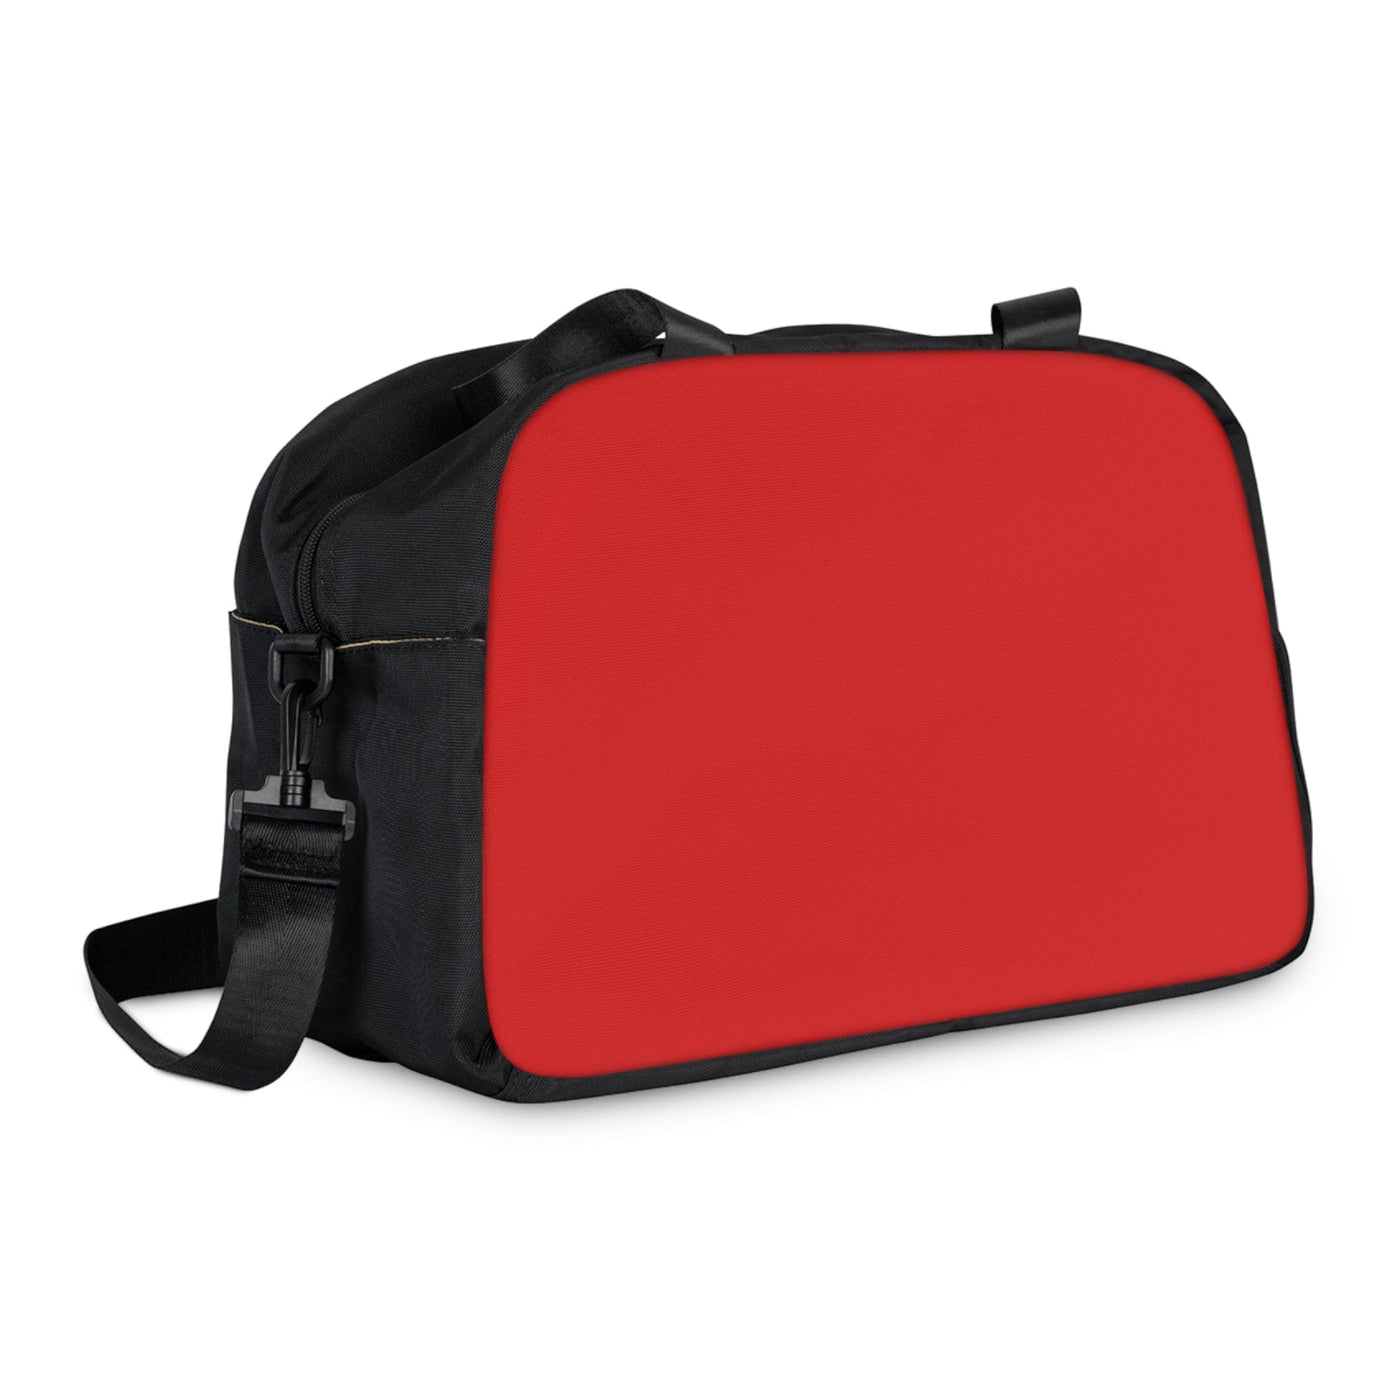 Travel Fitness Bag Red - Bags